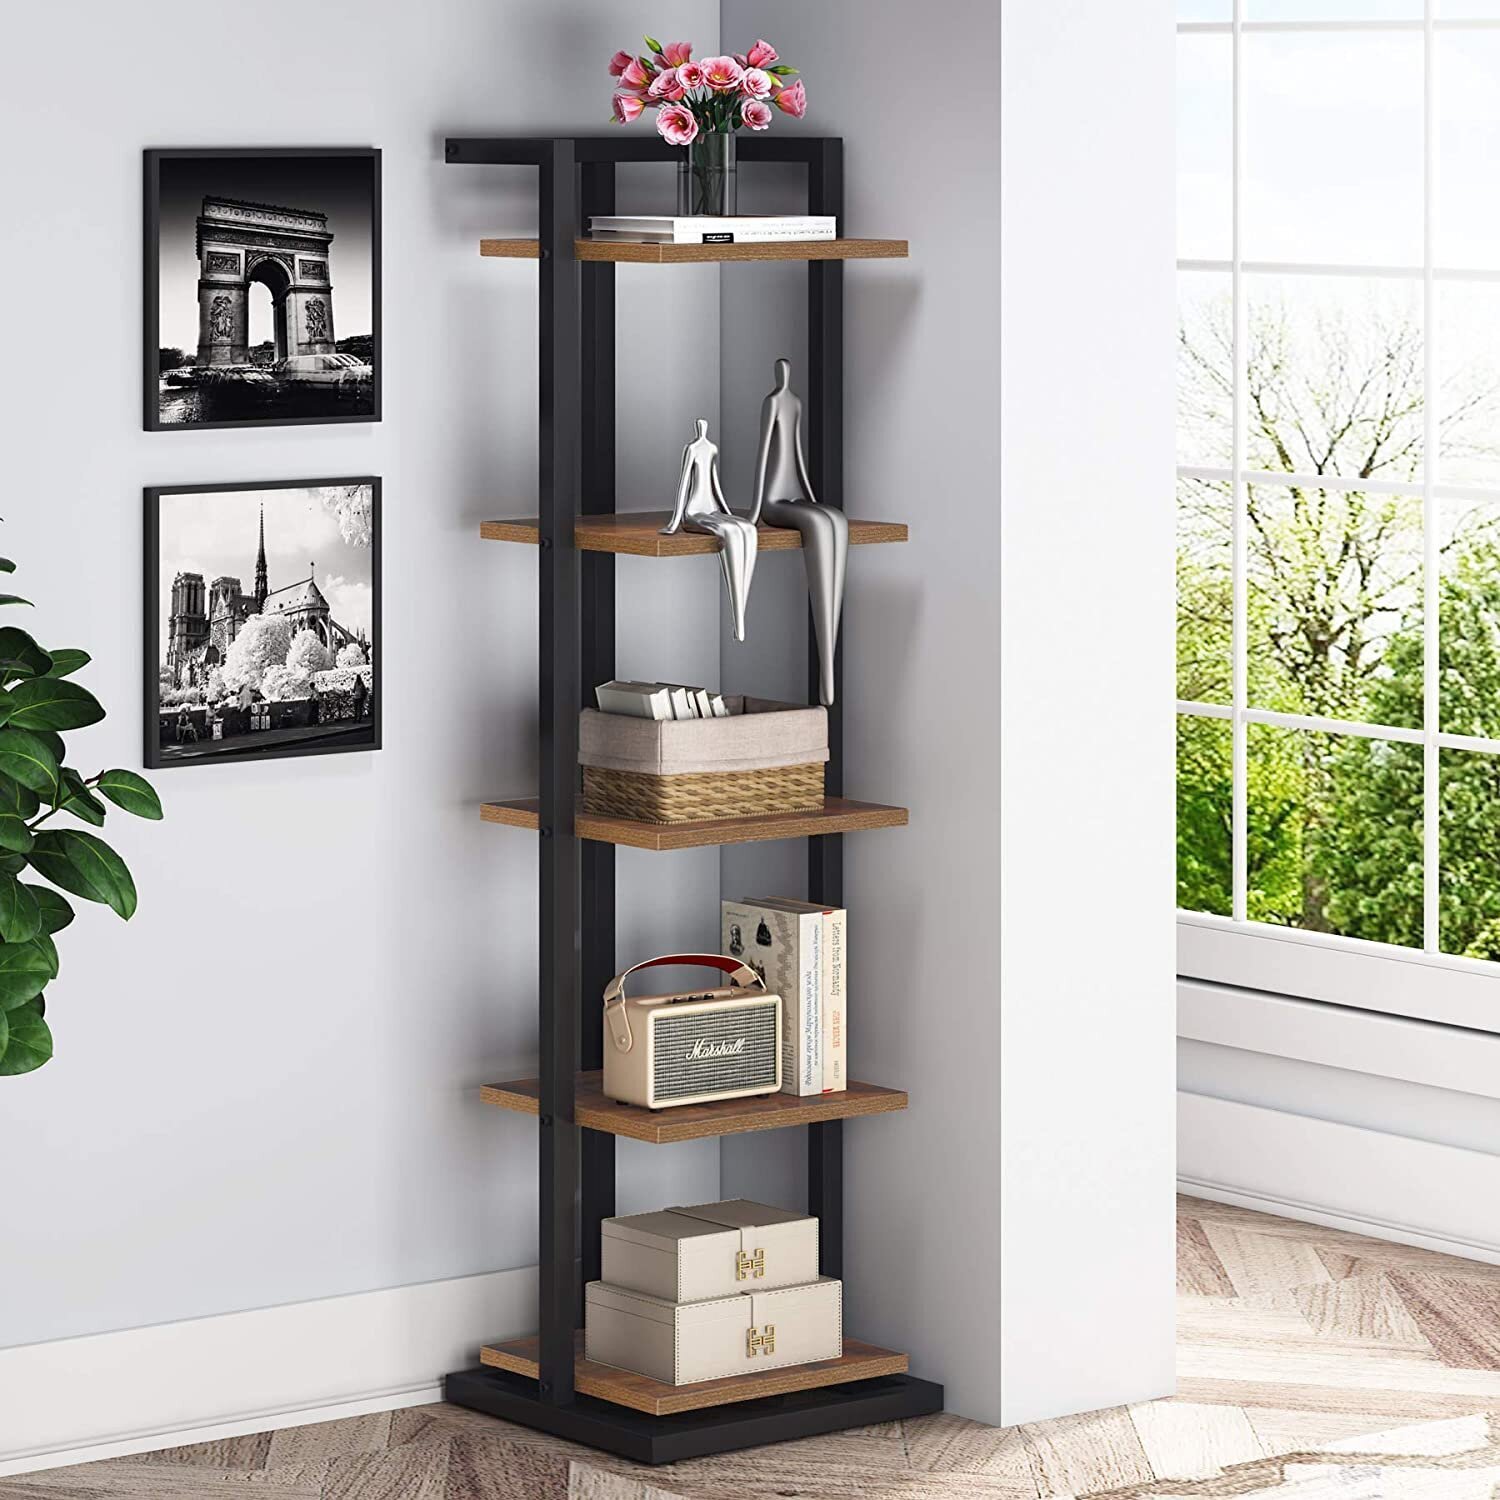 Narrow Bookcase with Modern Floating Shelves to Display Your Books 